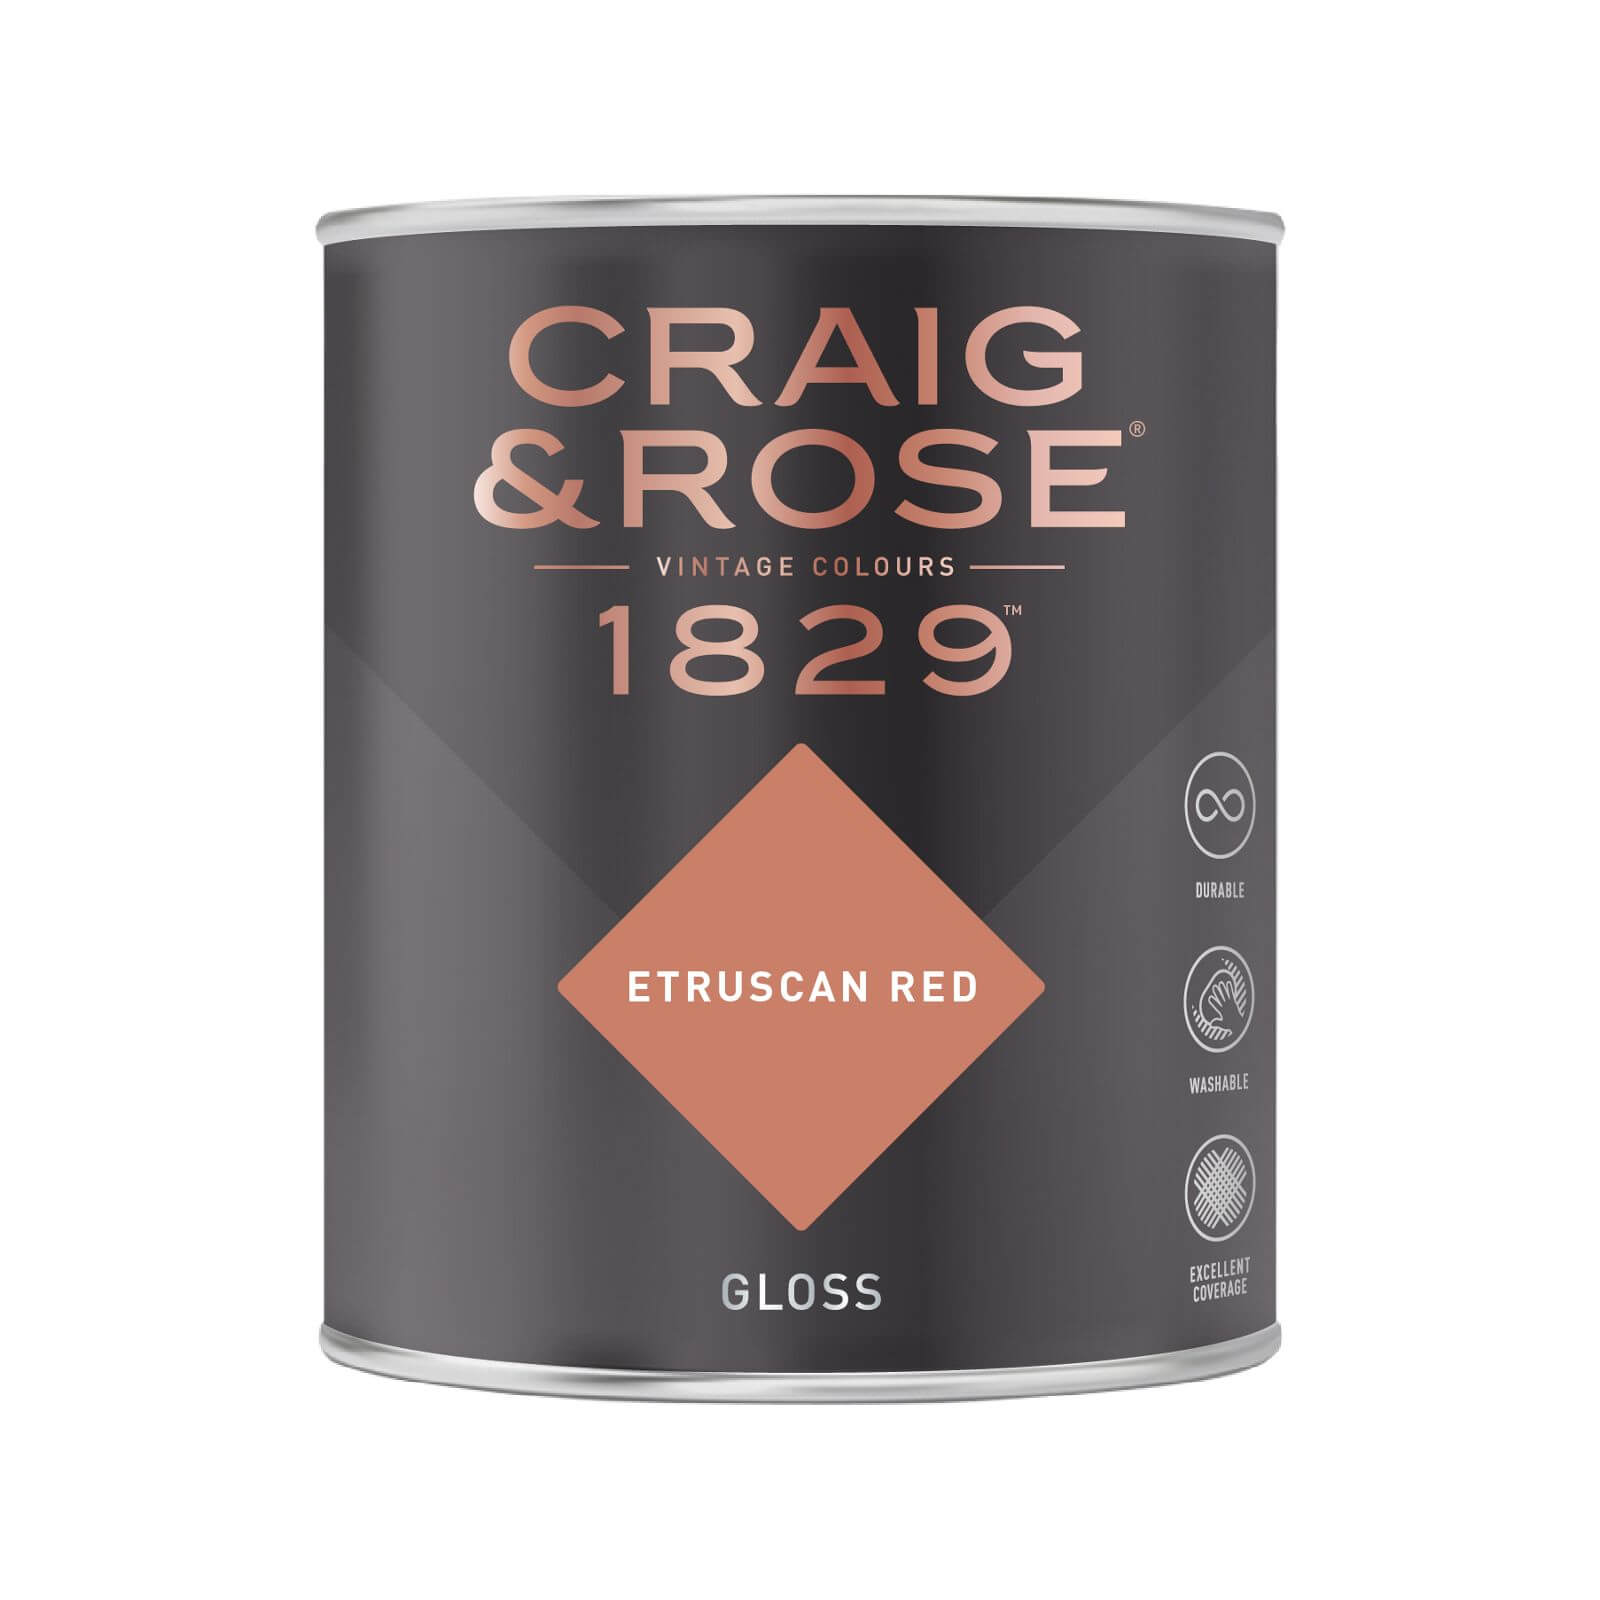 Craig & Rose 1829 Gloss Paint Etruscan Red - 750ml